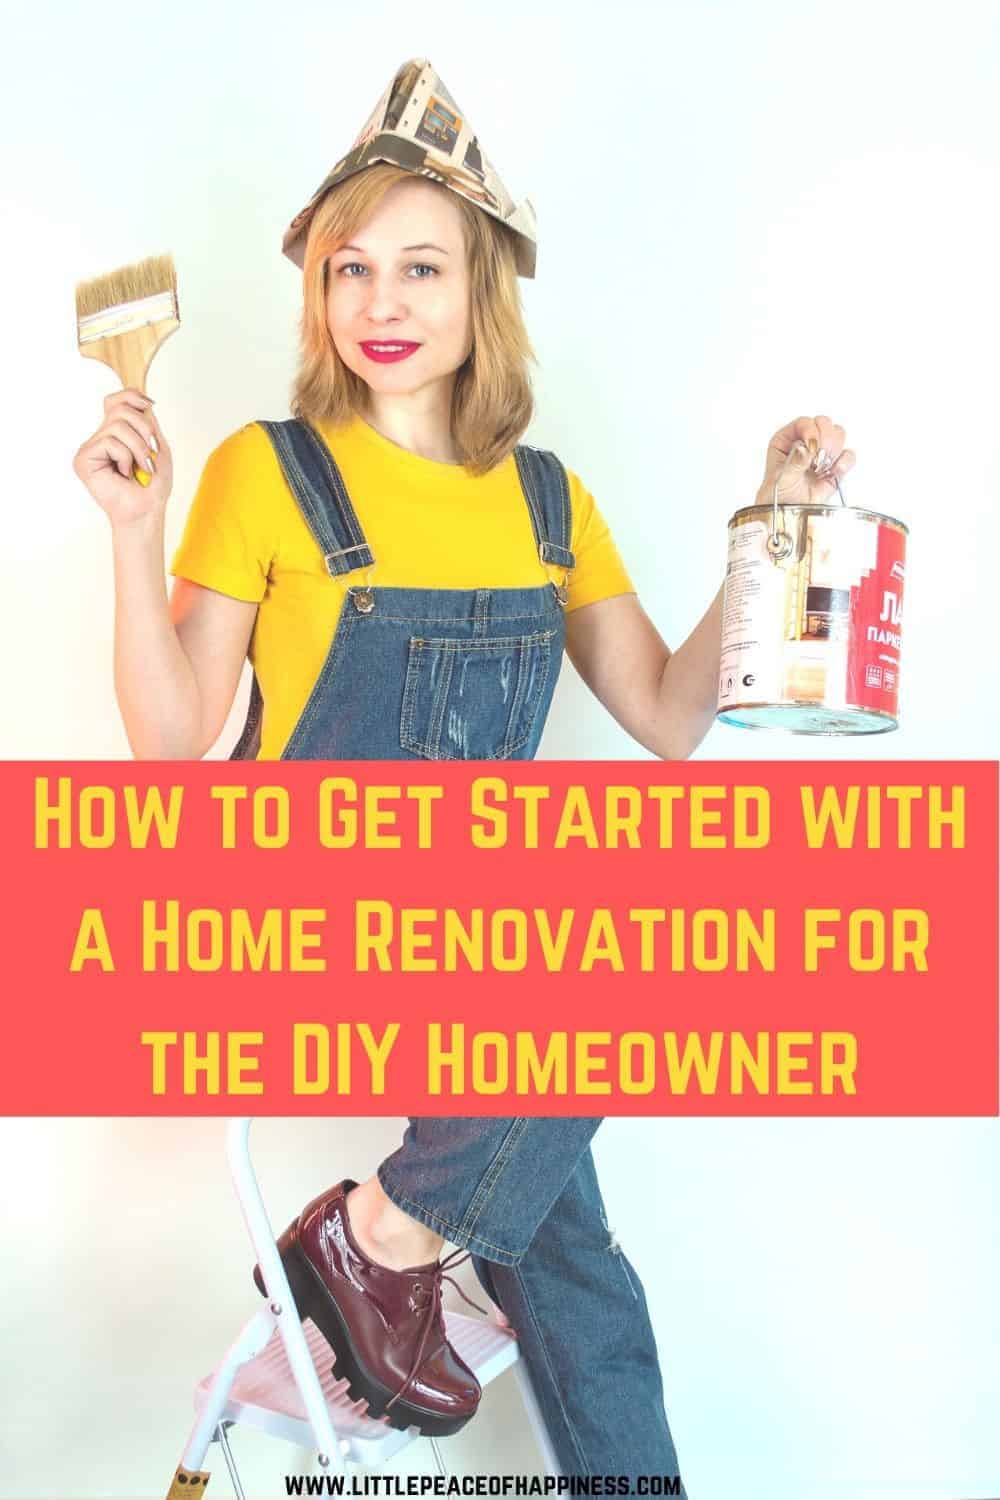 How to get started with a home renovation for the diy homeowner